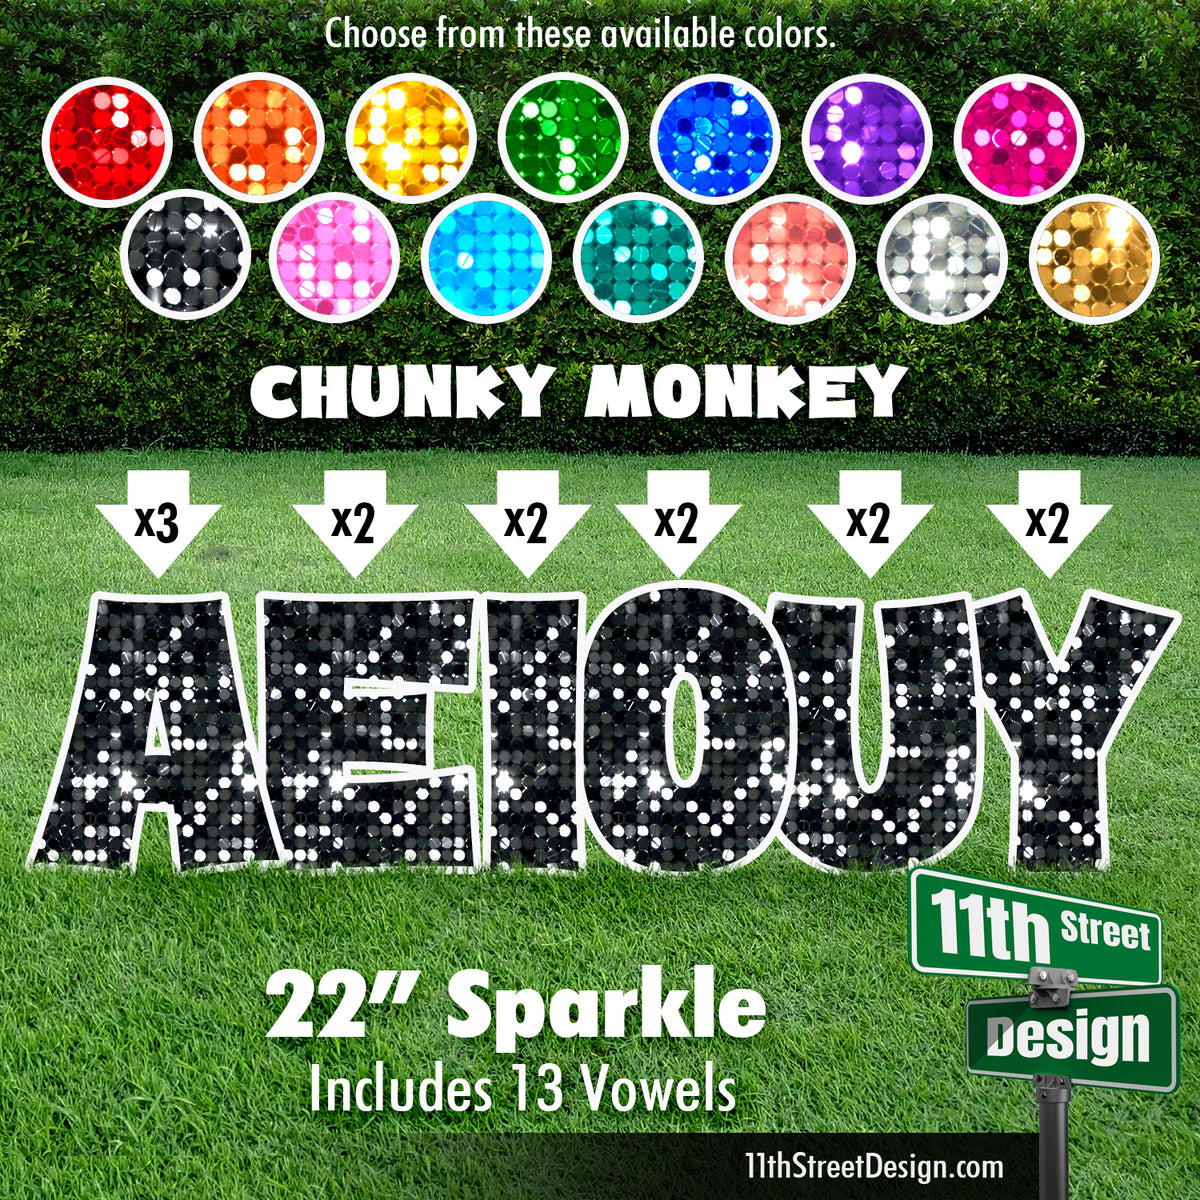 Sparkle 22&quot; Chunky Monkey Yard Card Set Includes 13 Vowels